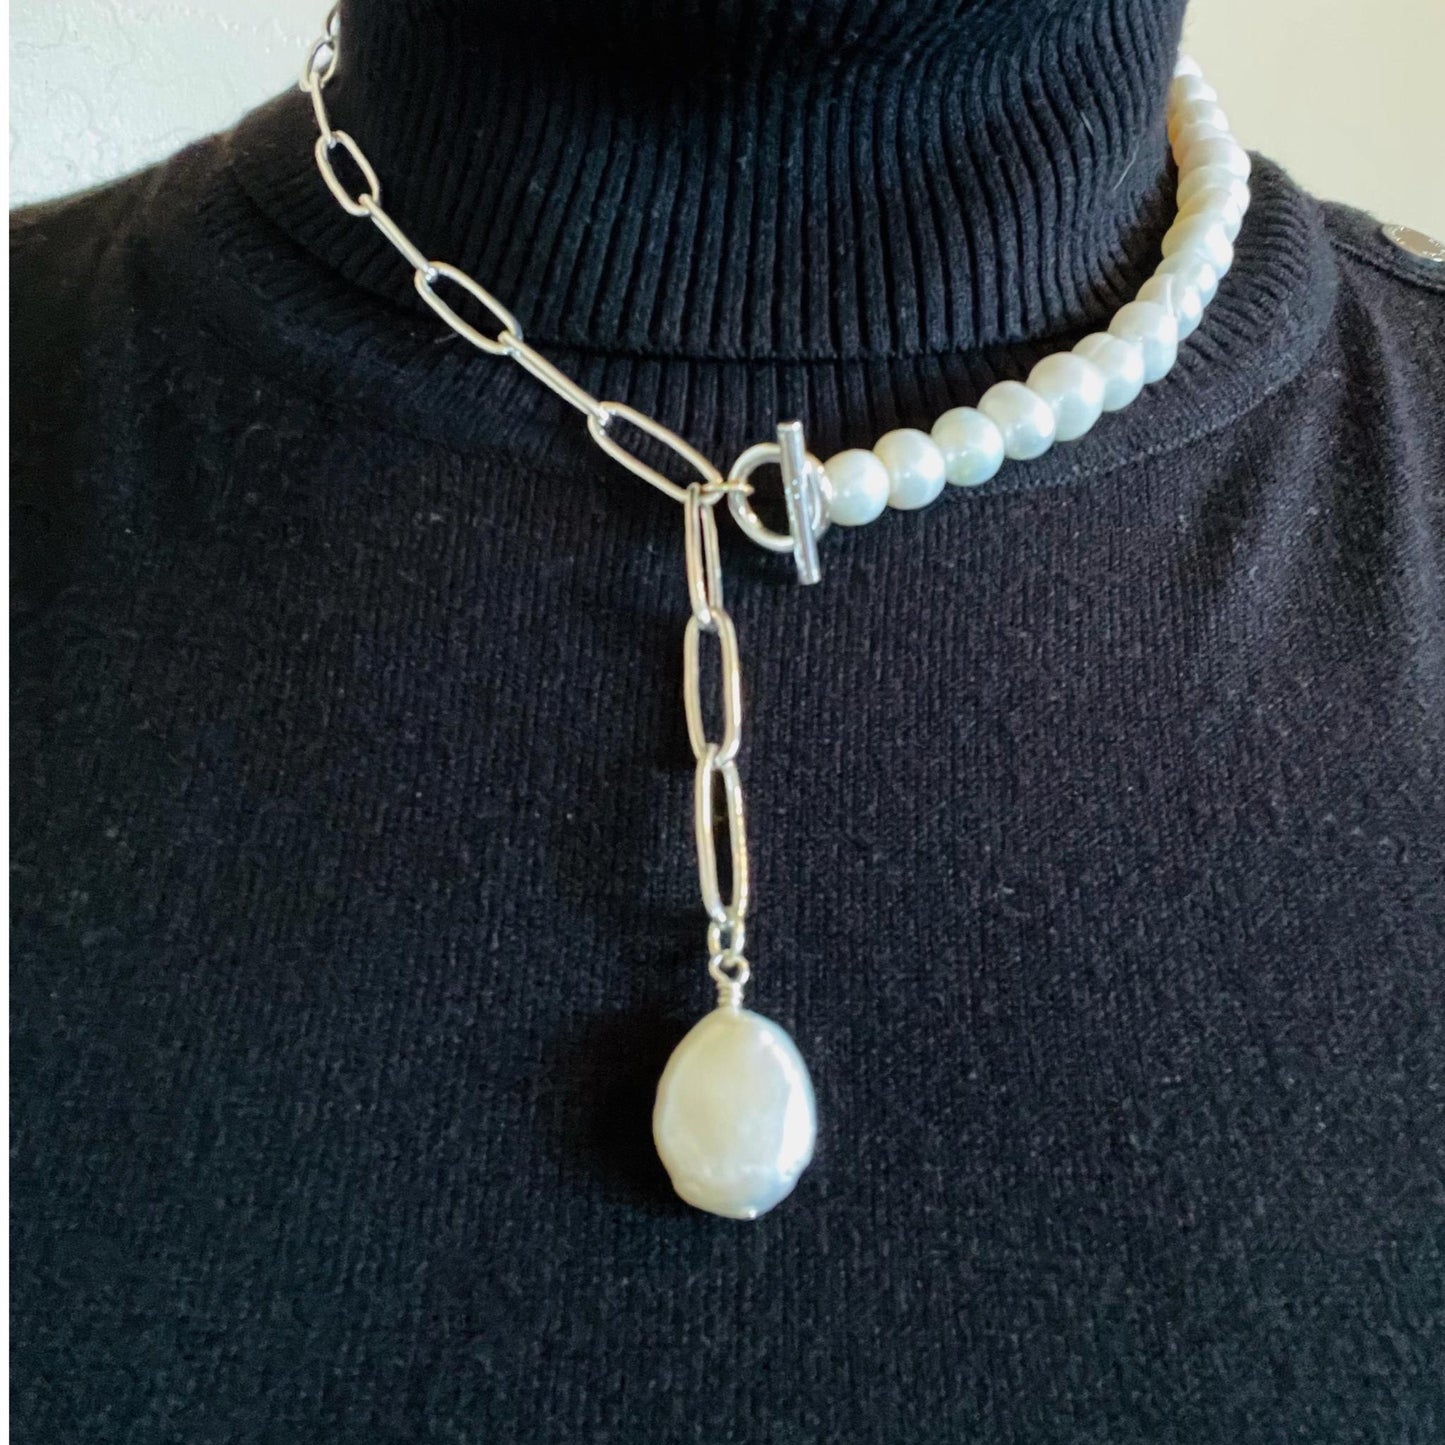 Freshwater Pearl & Sterling Silver Necklace with a Pearl Drop